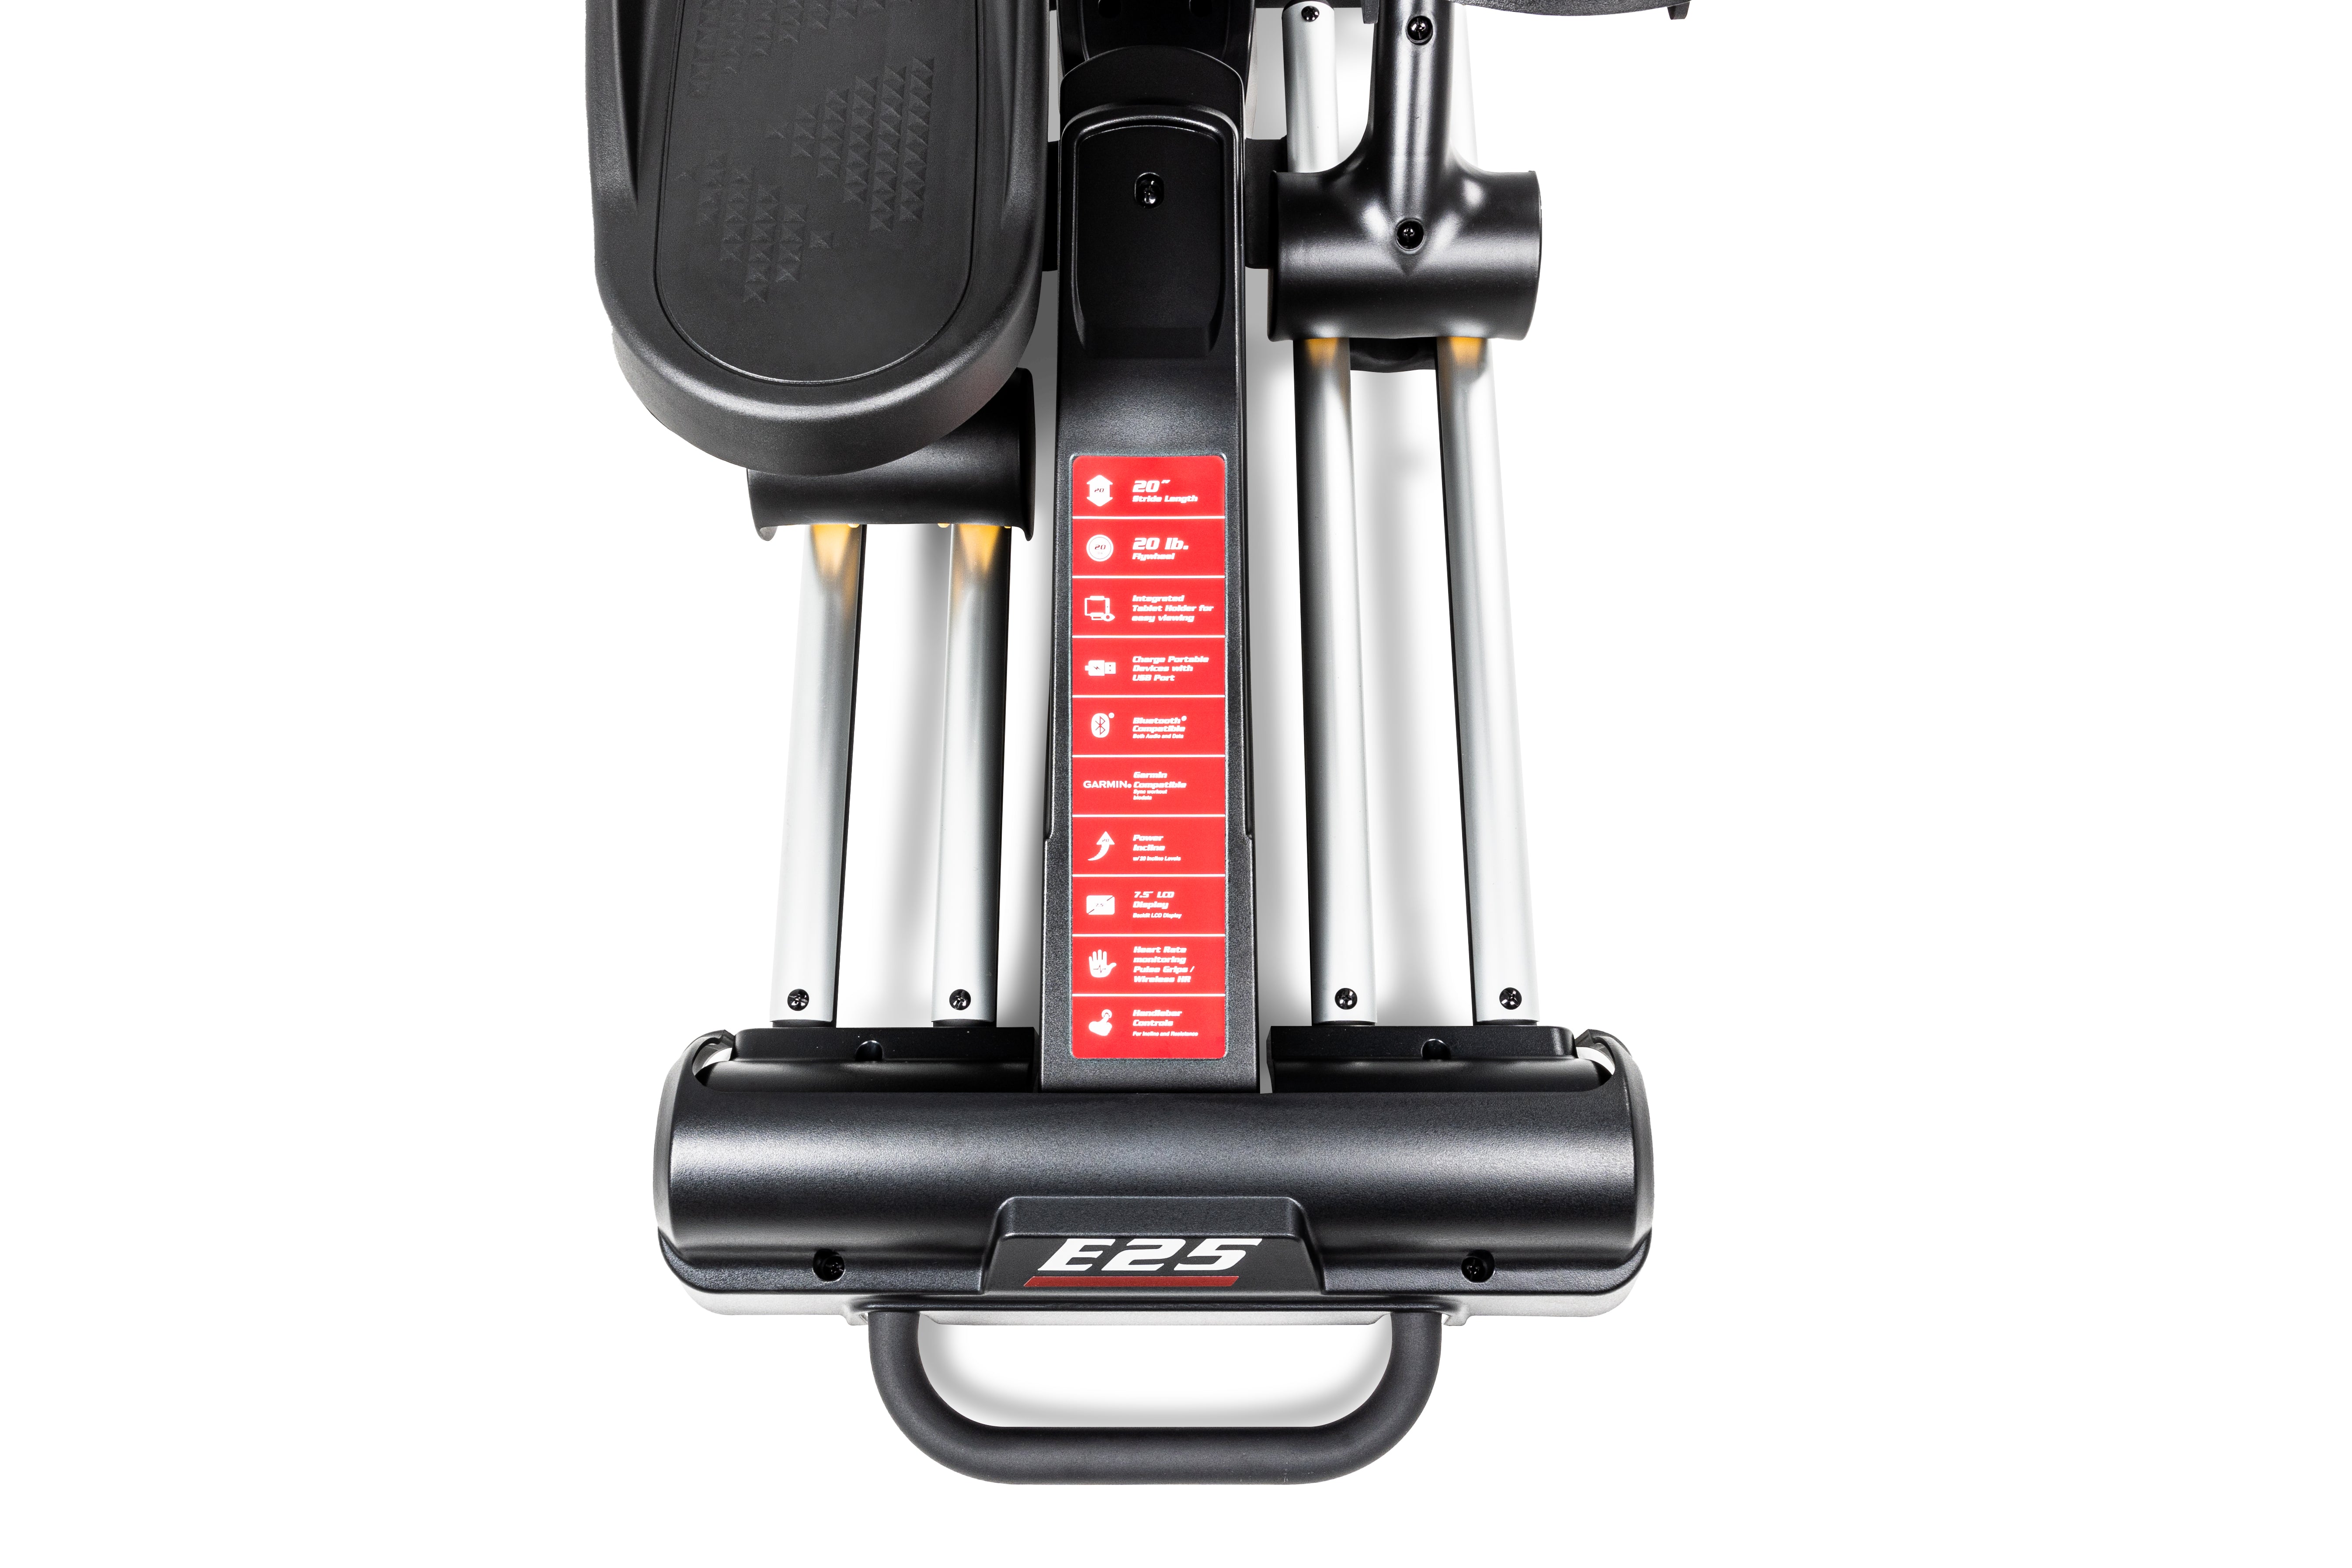 Close-up view of the base of the Sole E25 elliptical trainer, displaying its textured foot pedal, metallic support columns, red labeled instruction strip, and the 'E25' logo on the front guard.